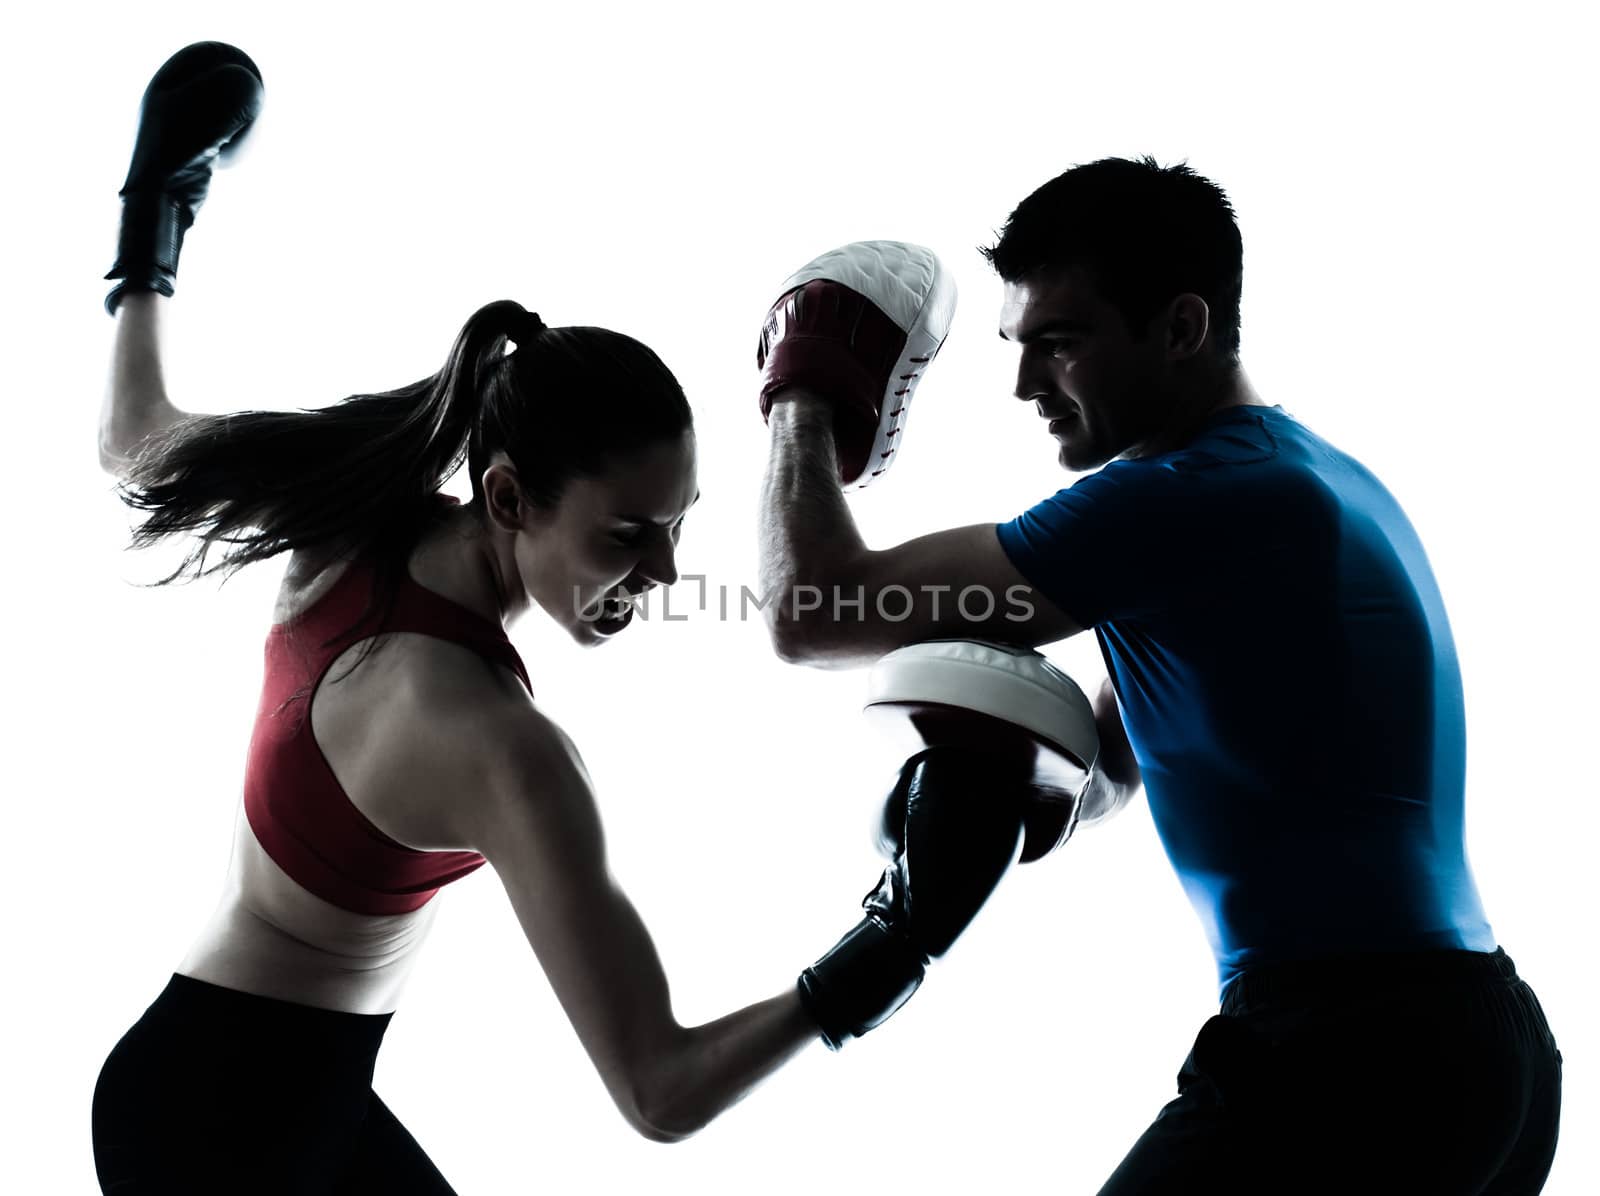 personal trainer man coach and woman exercising boxing silhouette studio isolated on white background